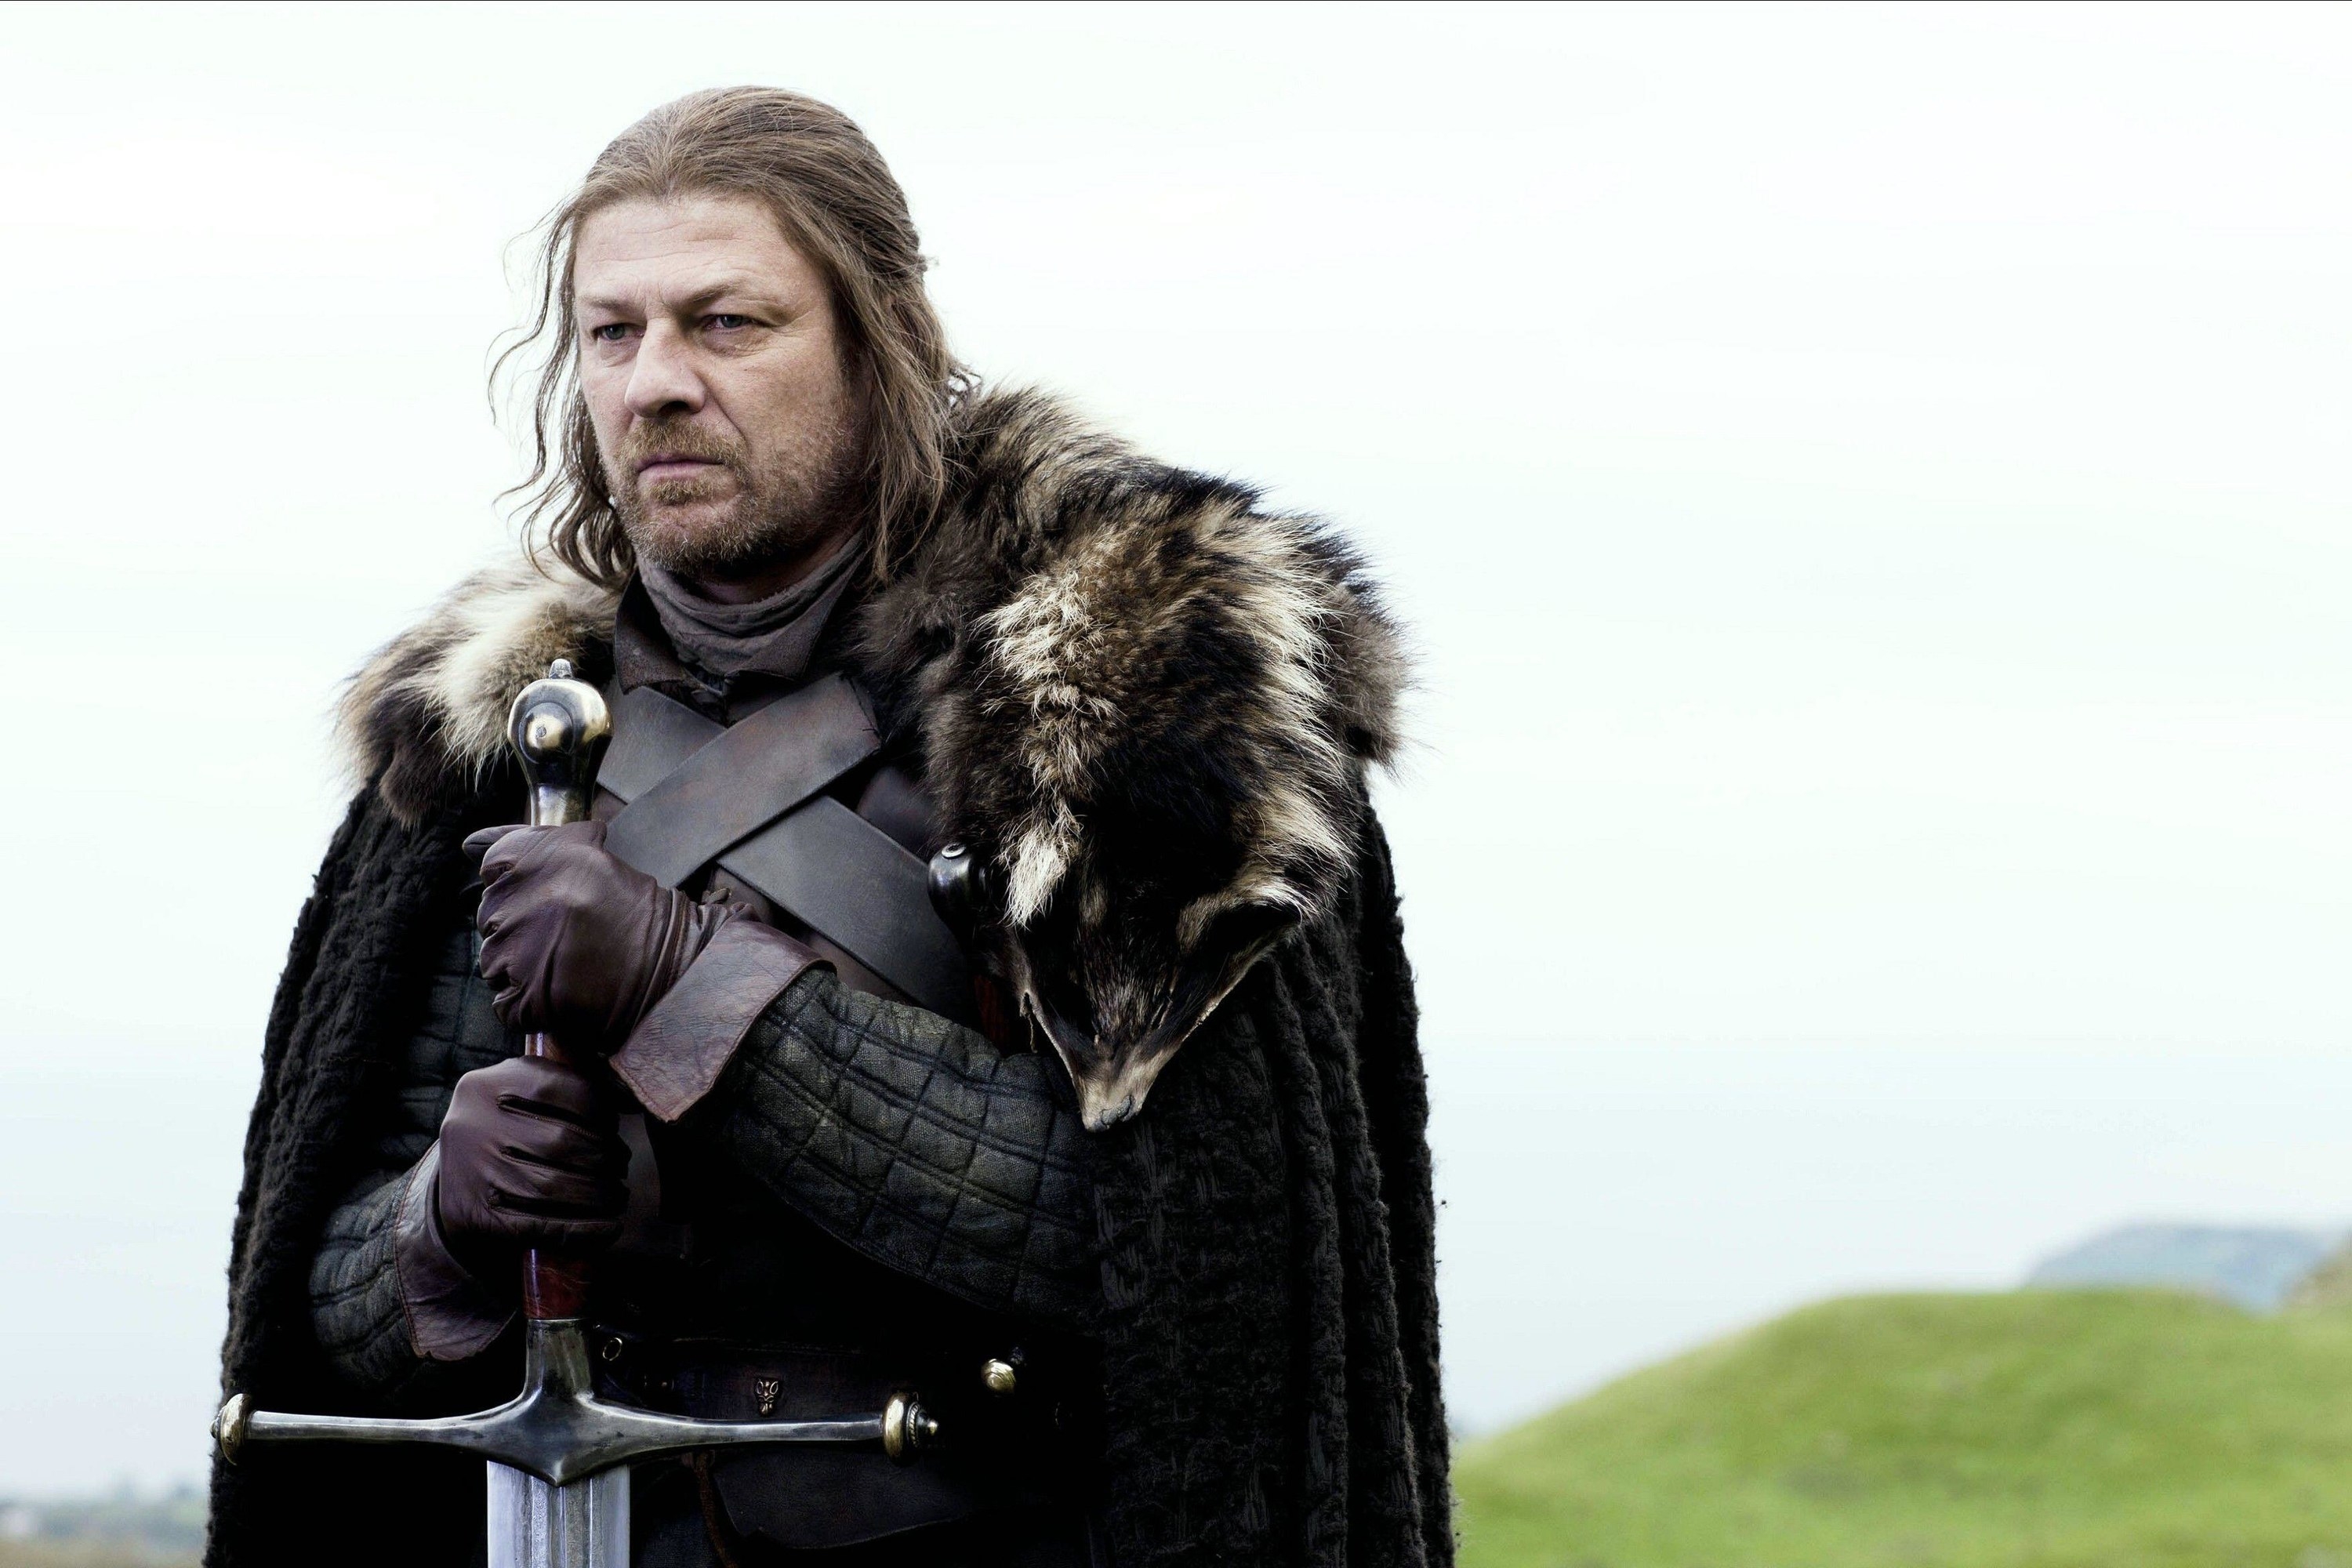 Sean Bean as Eddard “Ned” Stark in &quot;Game of Thrones&quot;